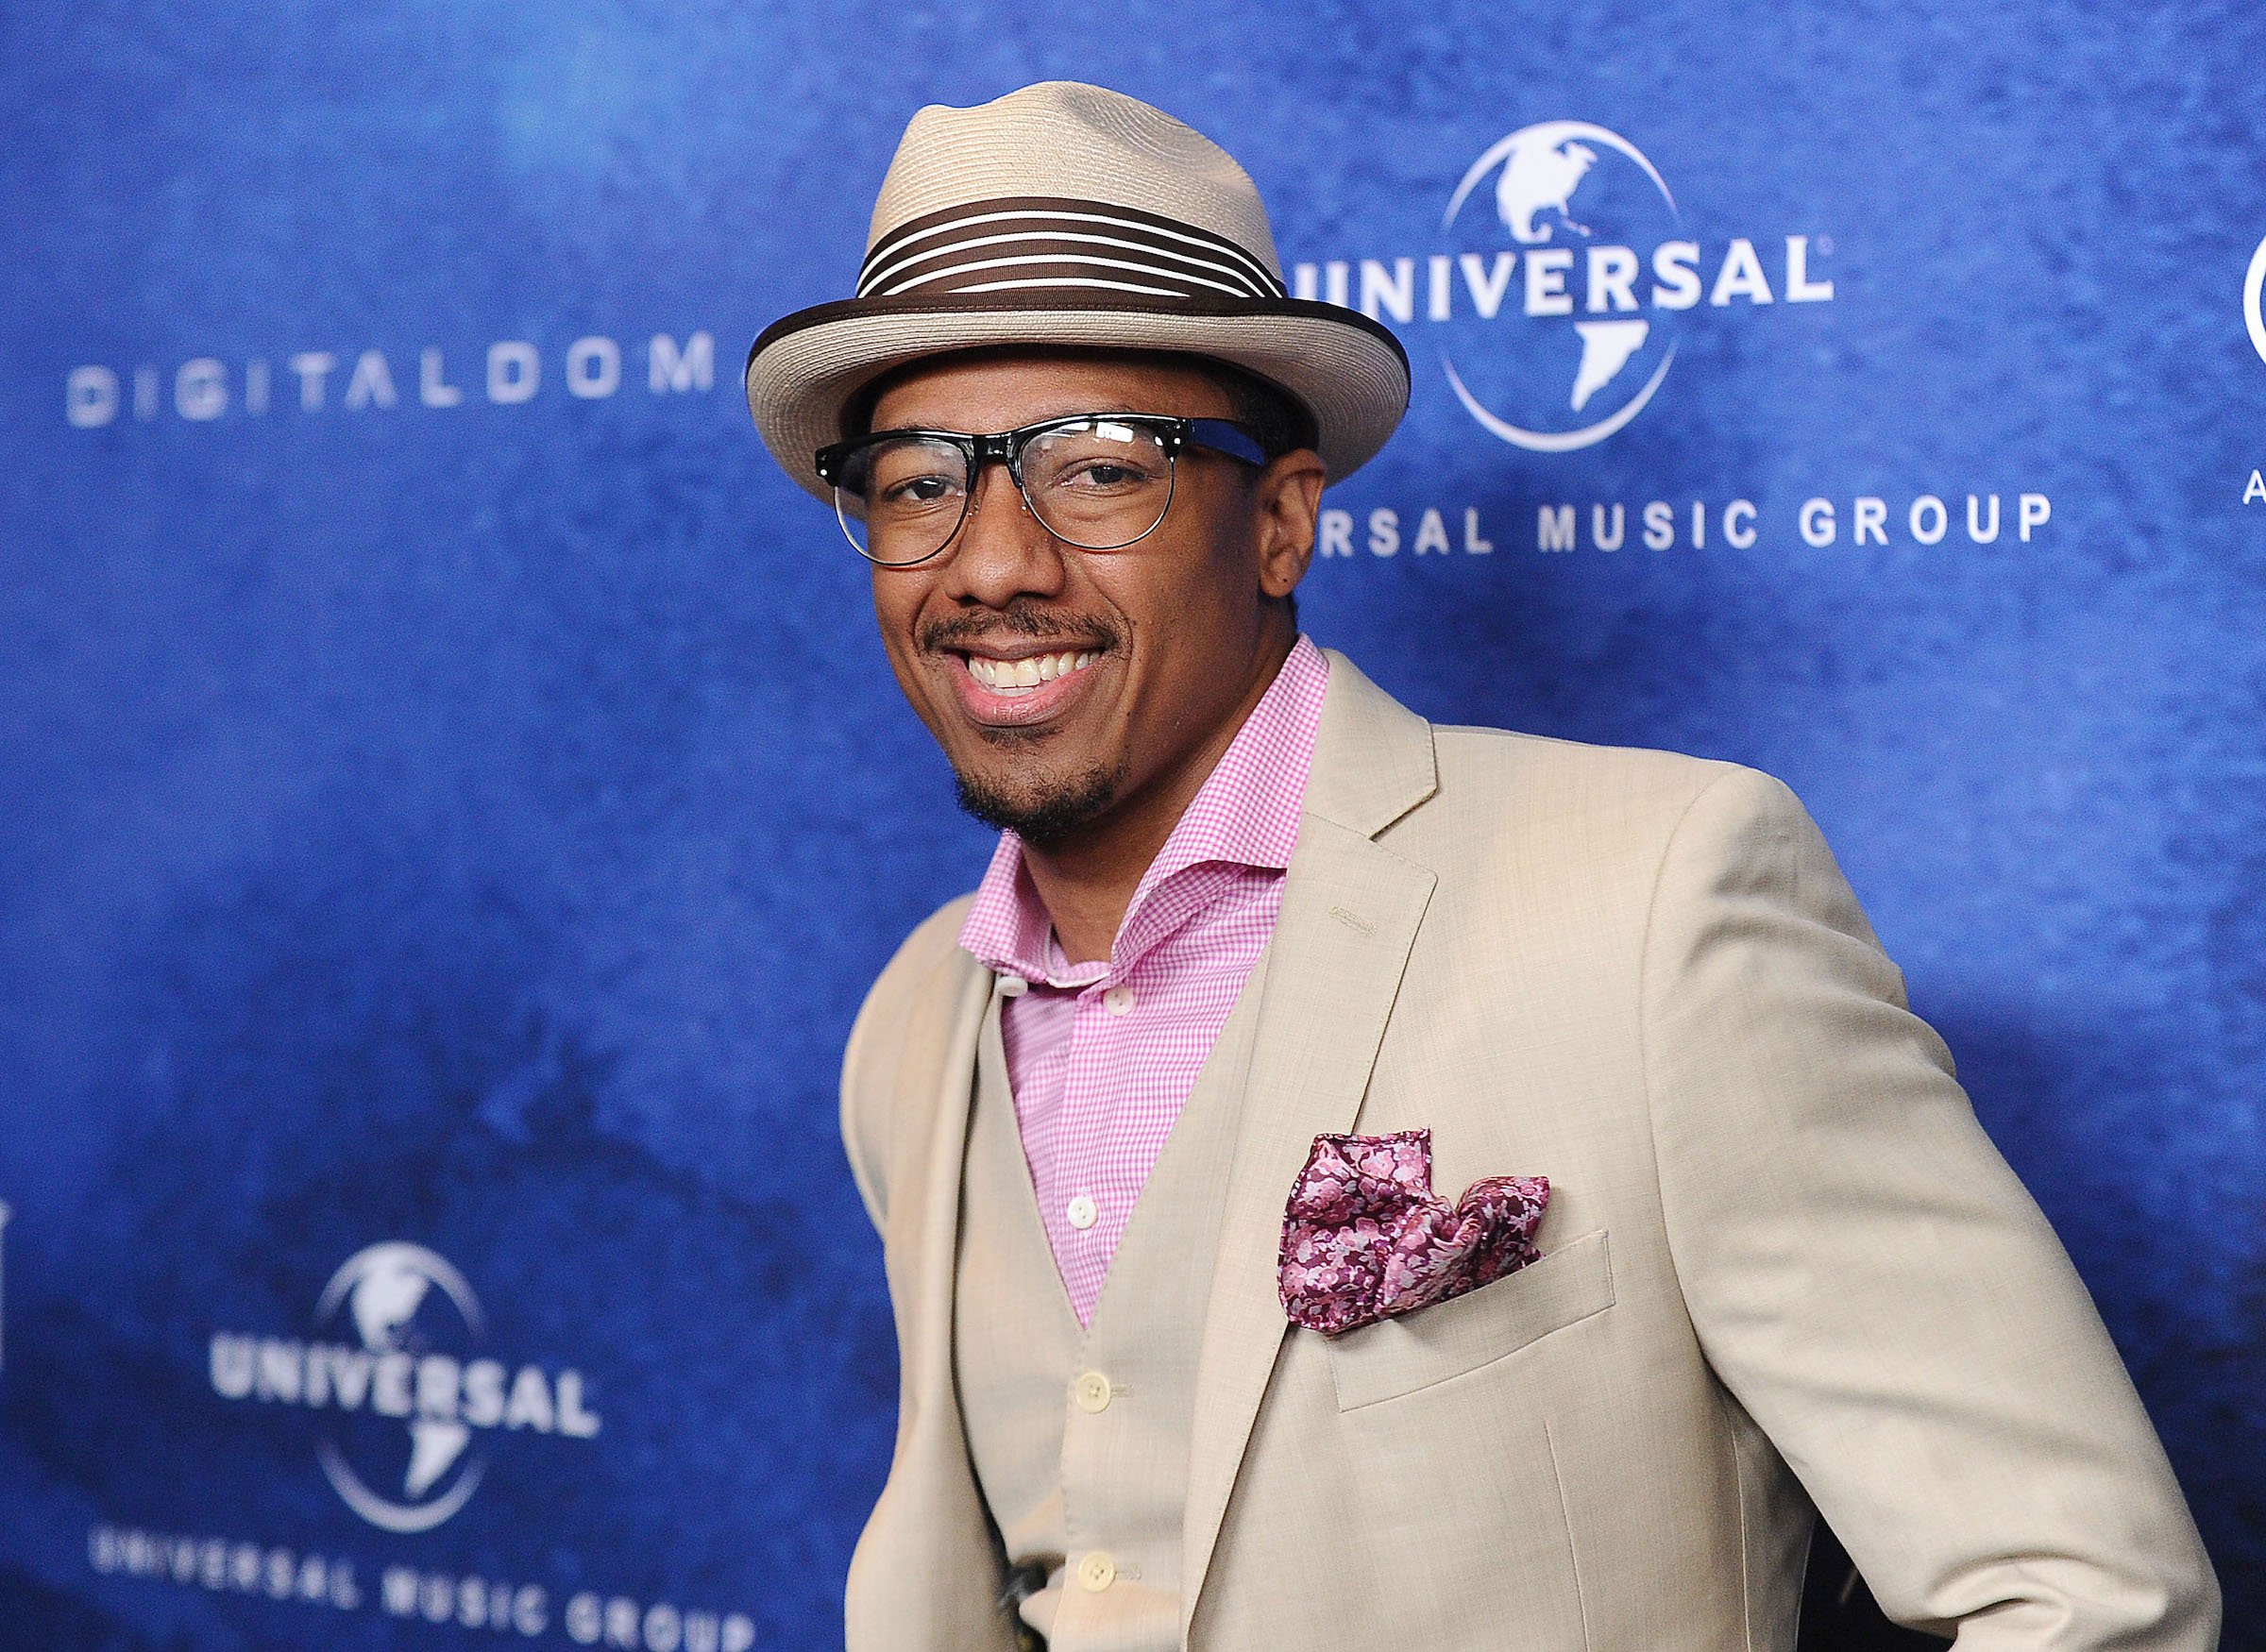 Nick Cannon, who has 9 children and counting, wearing a gray suit against a blue backdrop.